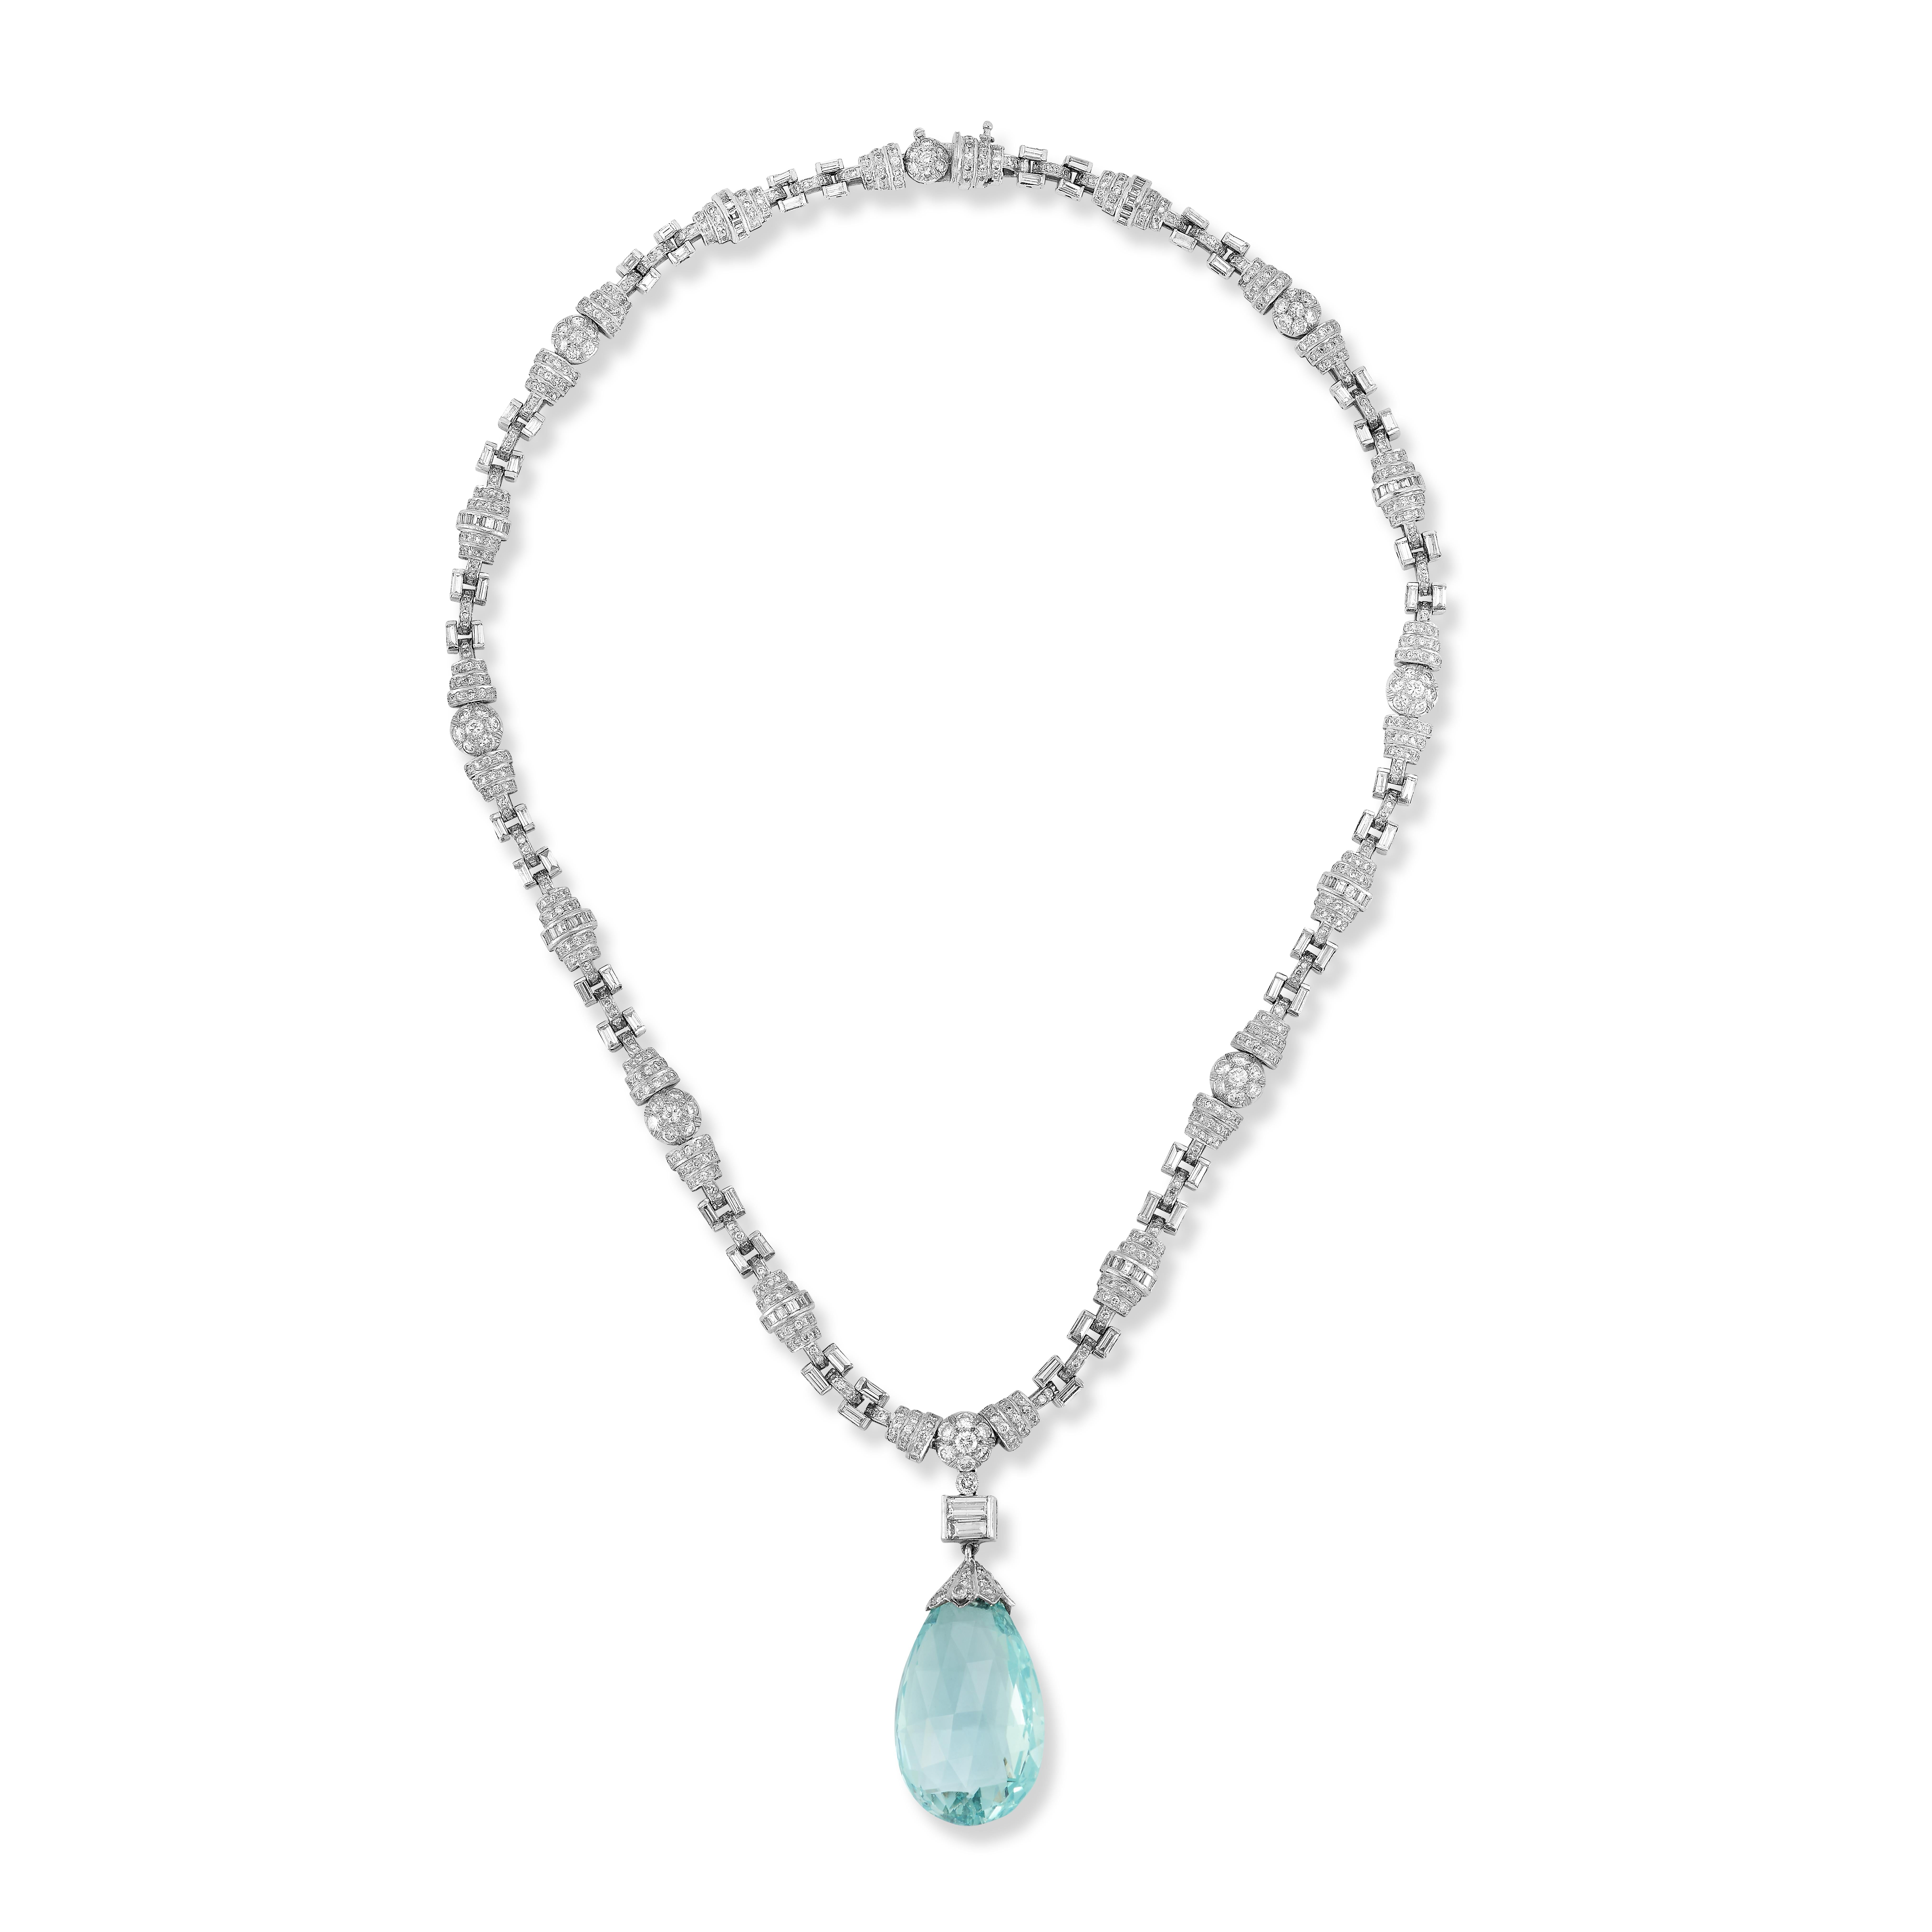 Aquamarine and Diamond Necklace
Briolette aquamarine approximate weight: 40 cts
18K white gold
Measurements: 16